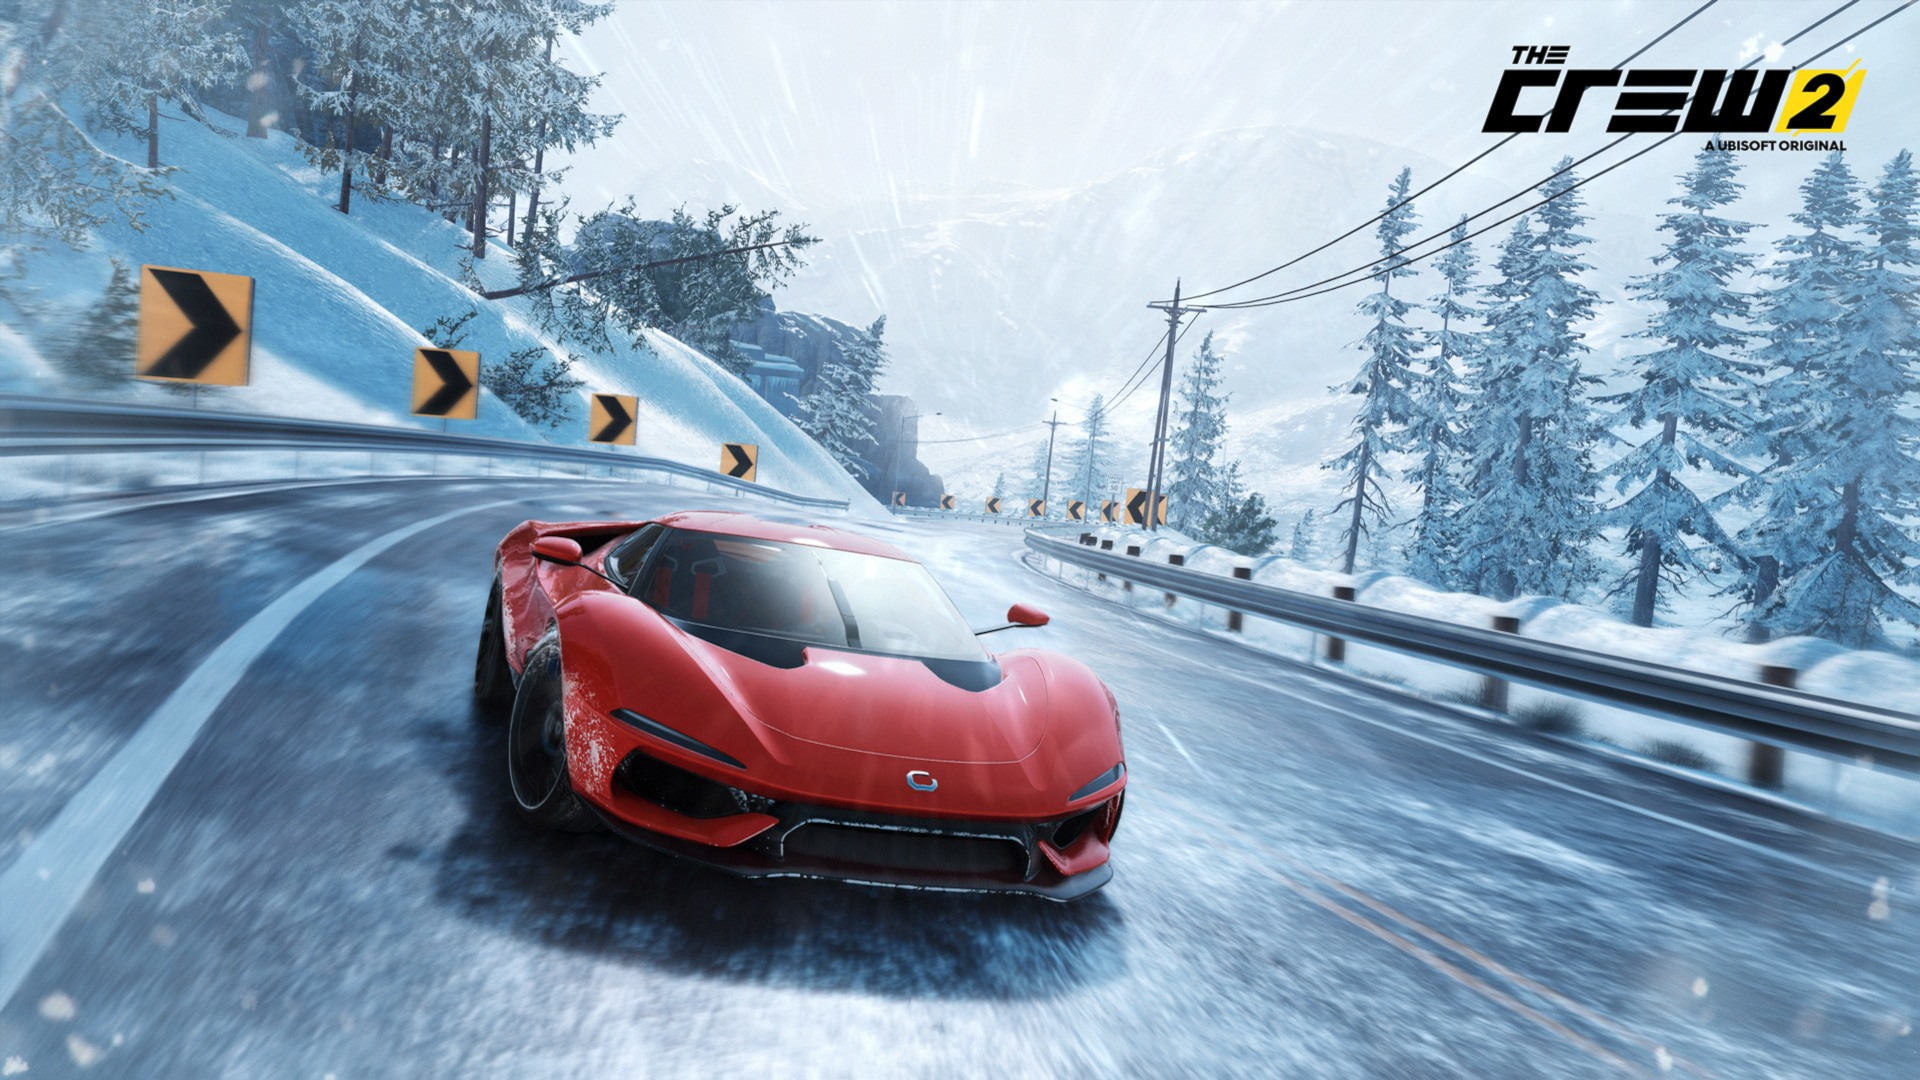 Video Game The Crew HD Wallpaper